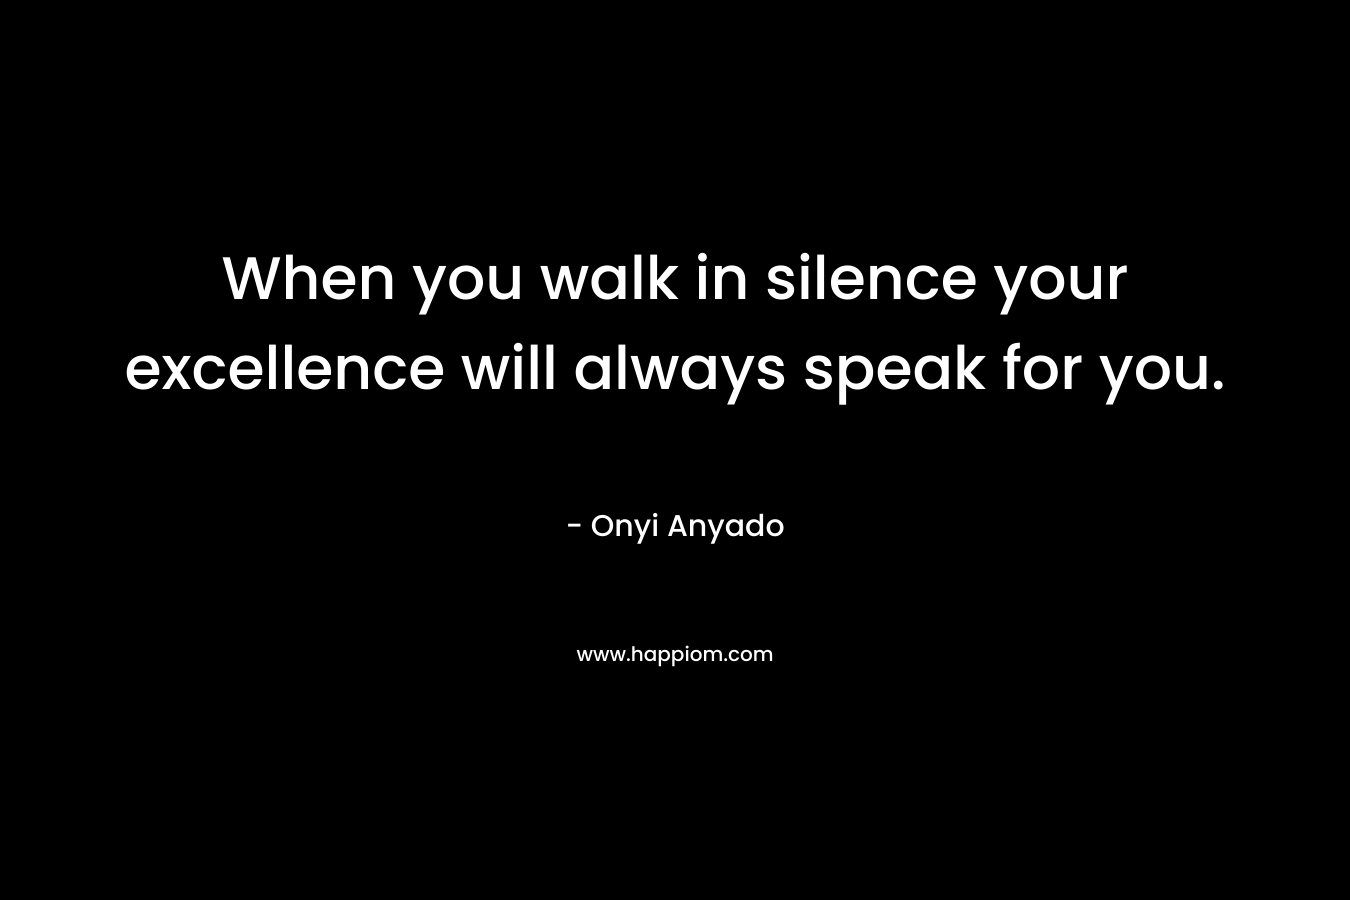 When you walk in silence your excellence will always speak for you. – Onyi Anyado